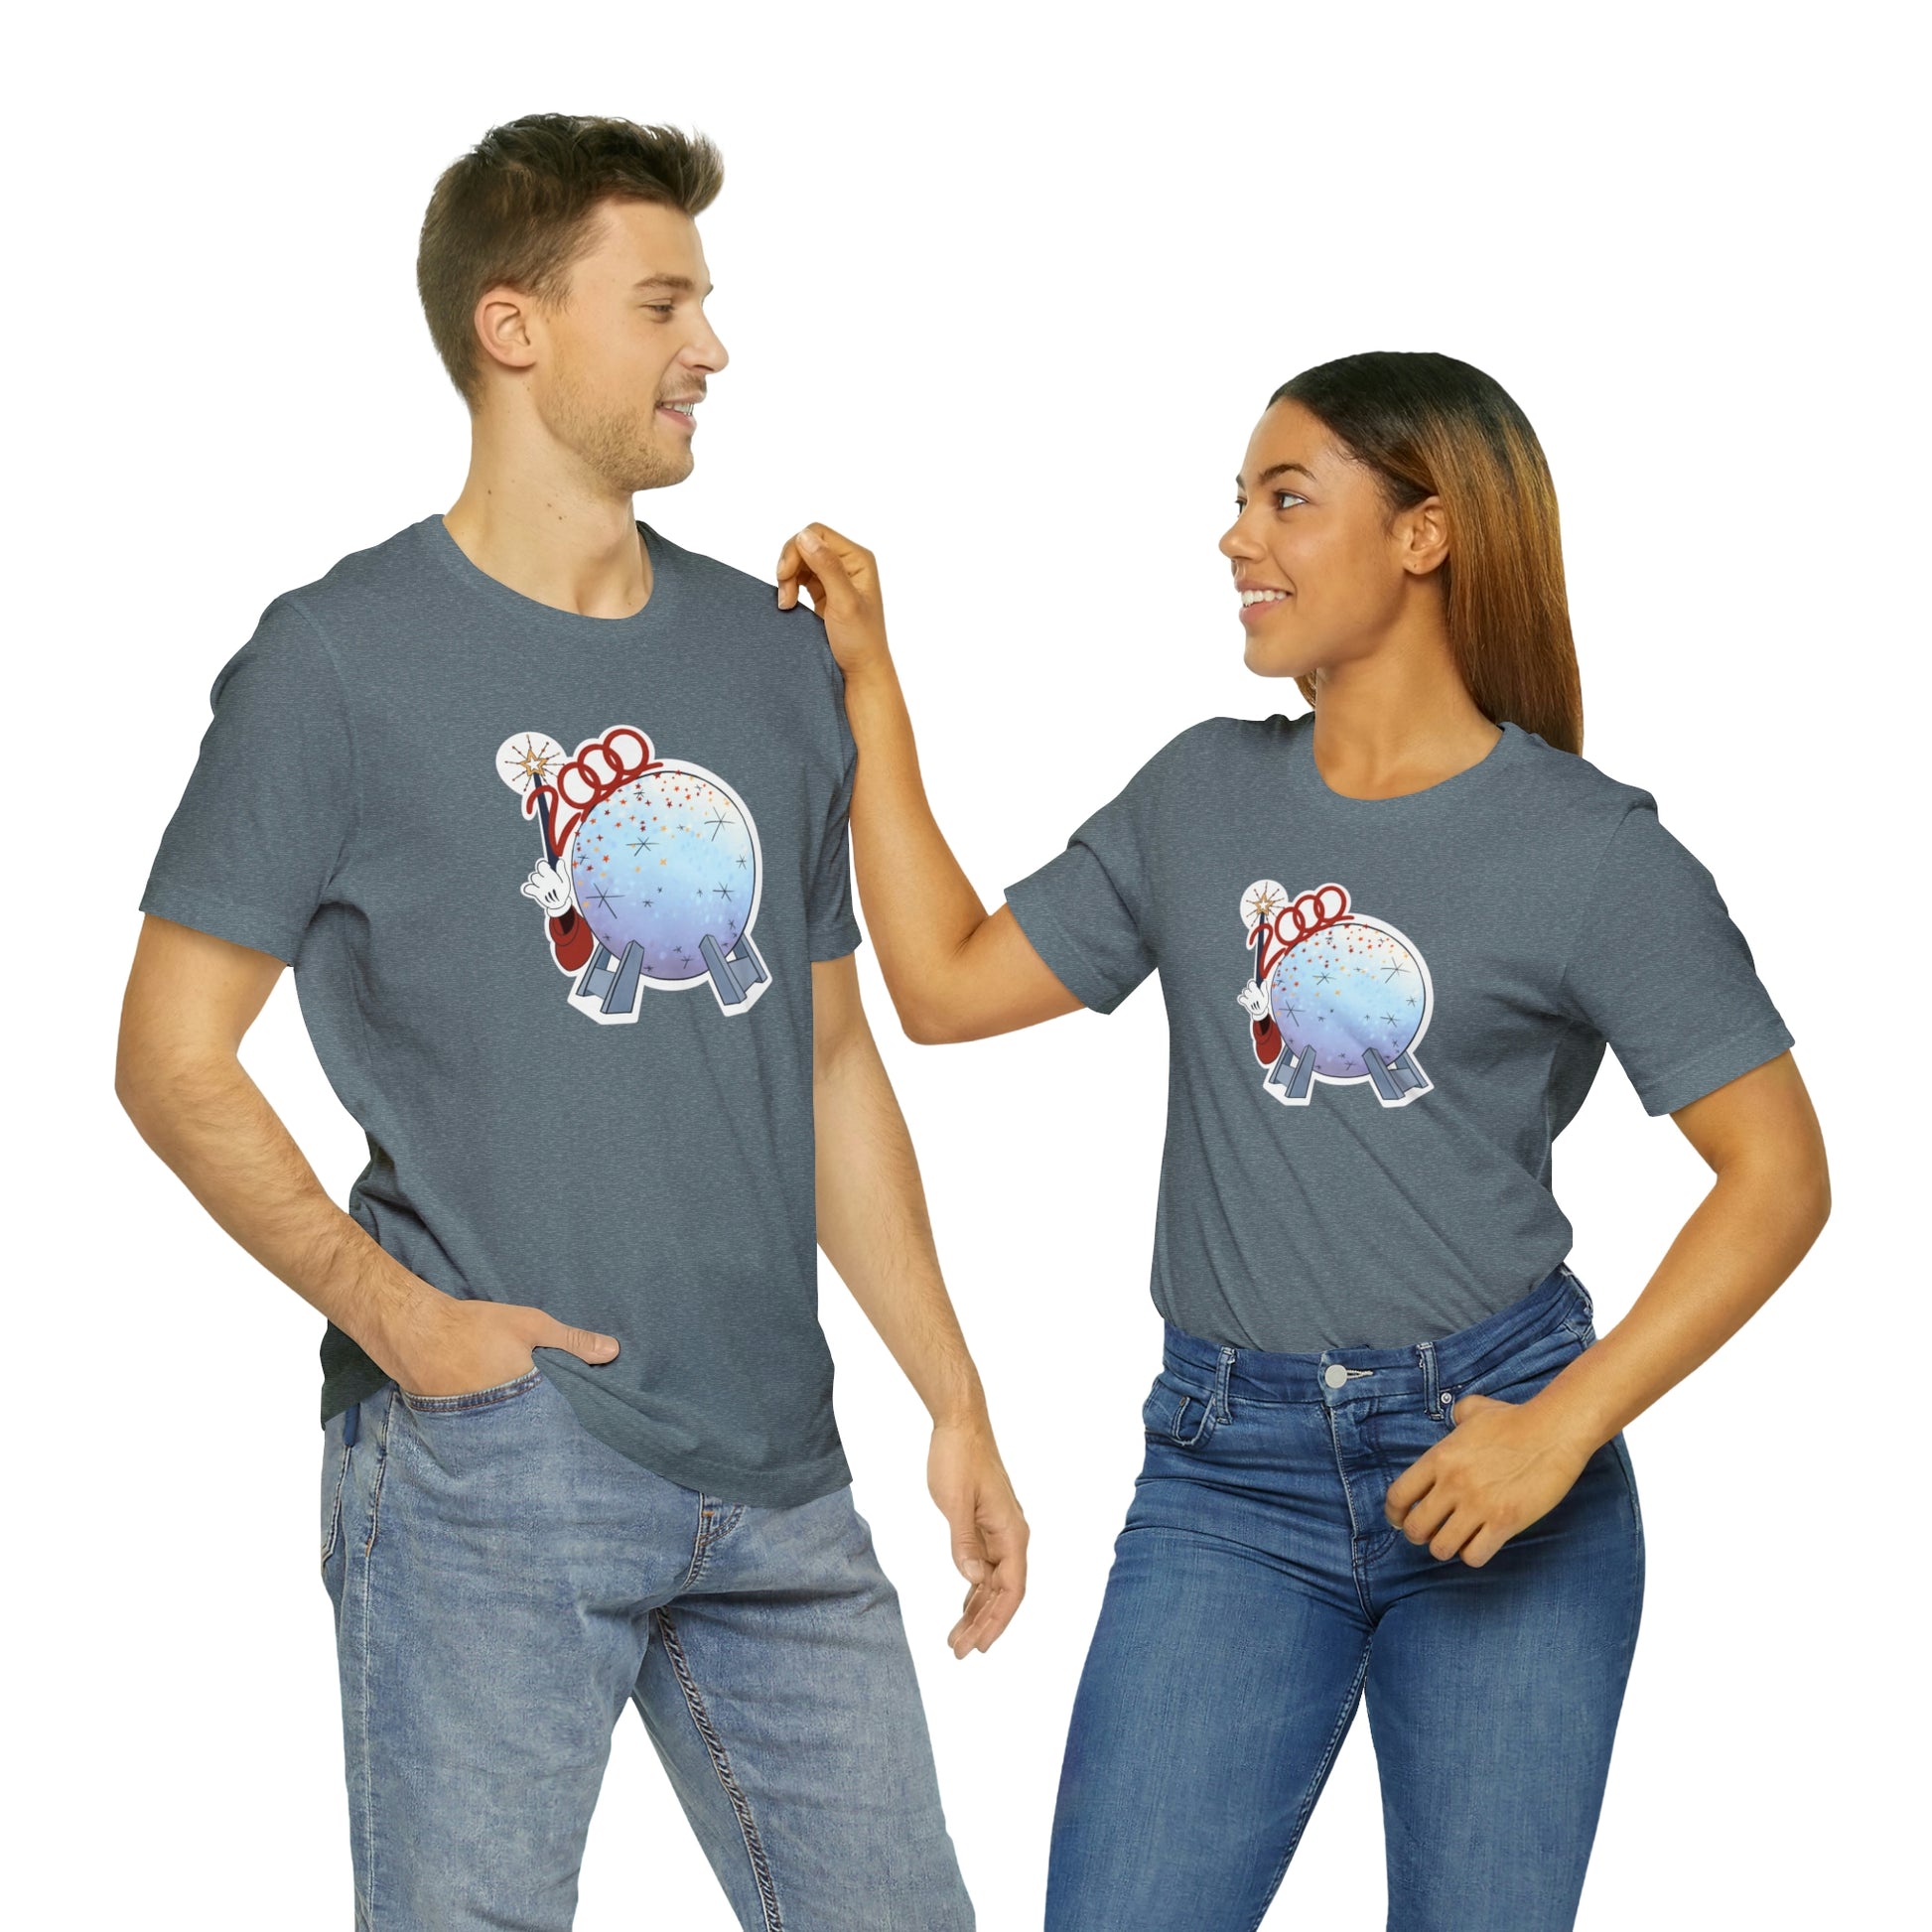 Epcot wand tee slate gray mens and Womens fit